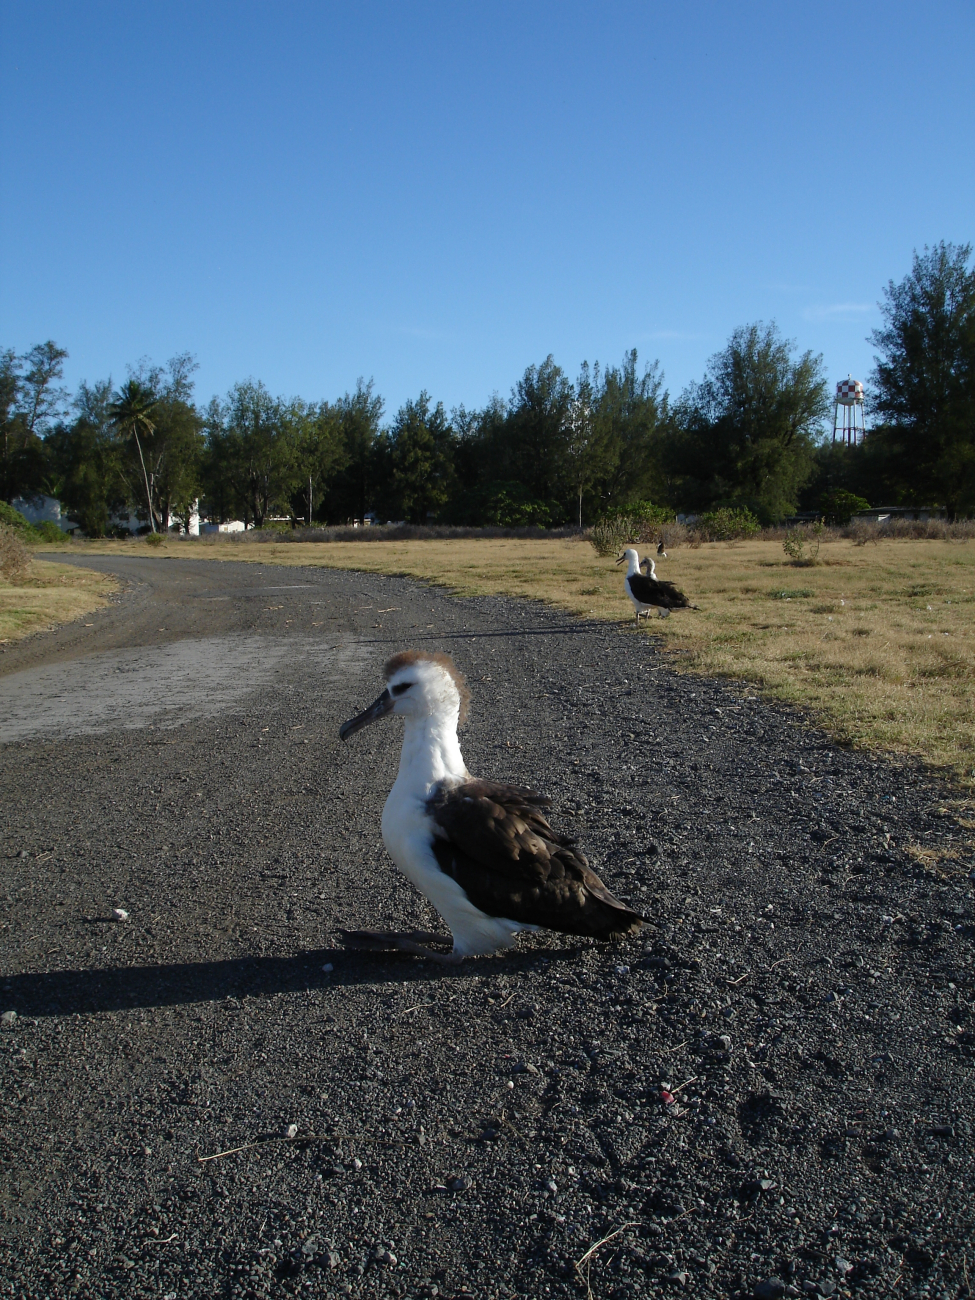 A juvenile albatross checking out what is on the other side of the road